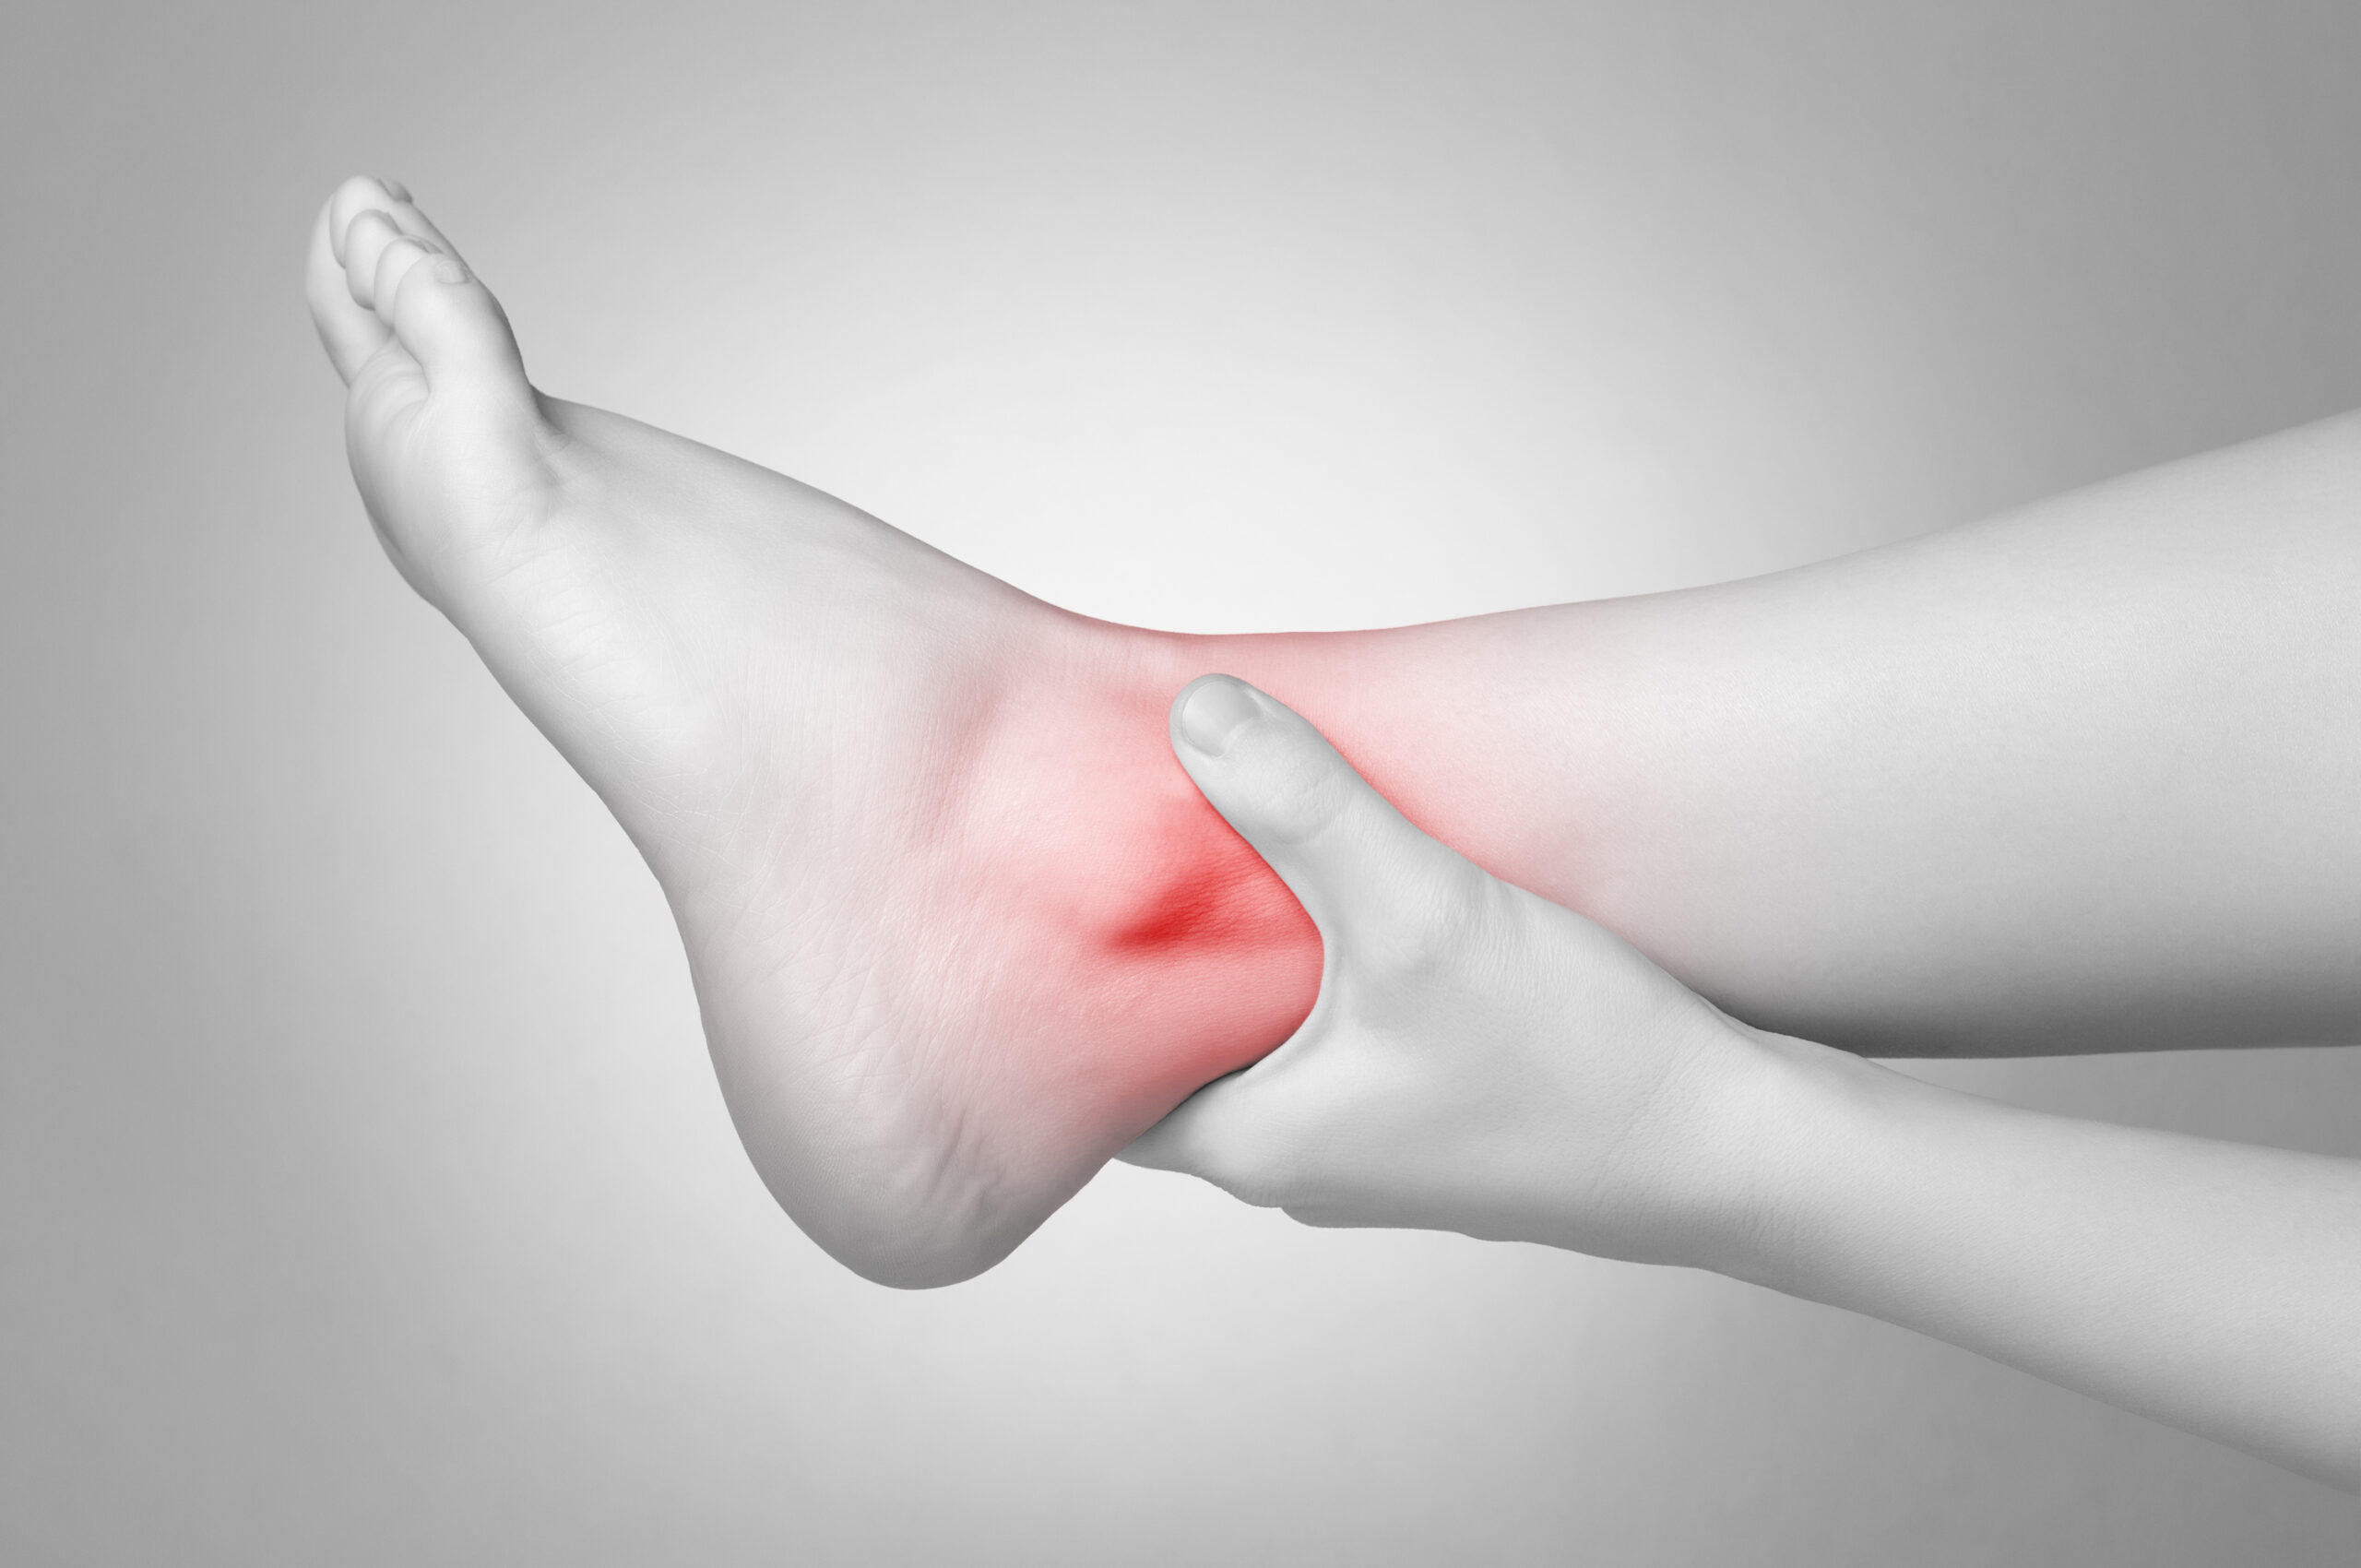 Ankle Sprain & Instability, Dr Mike Smith